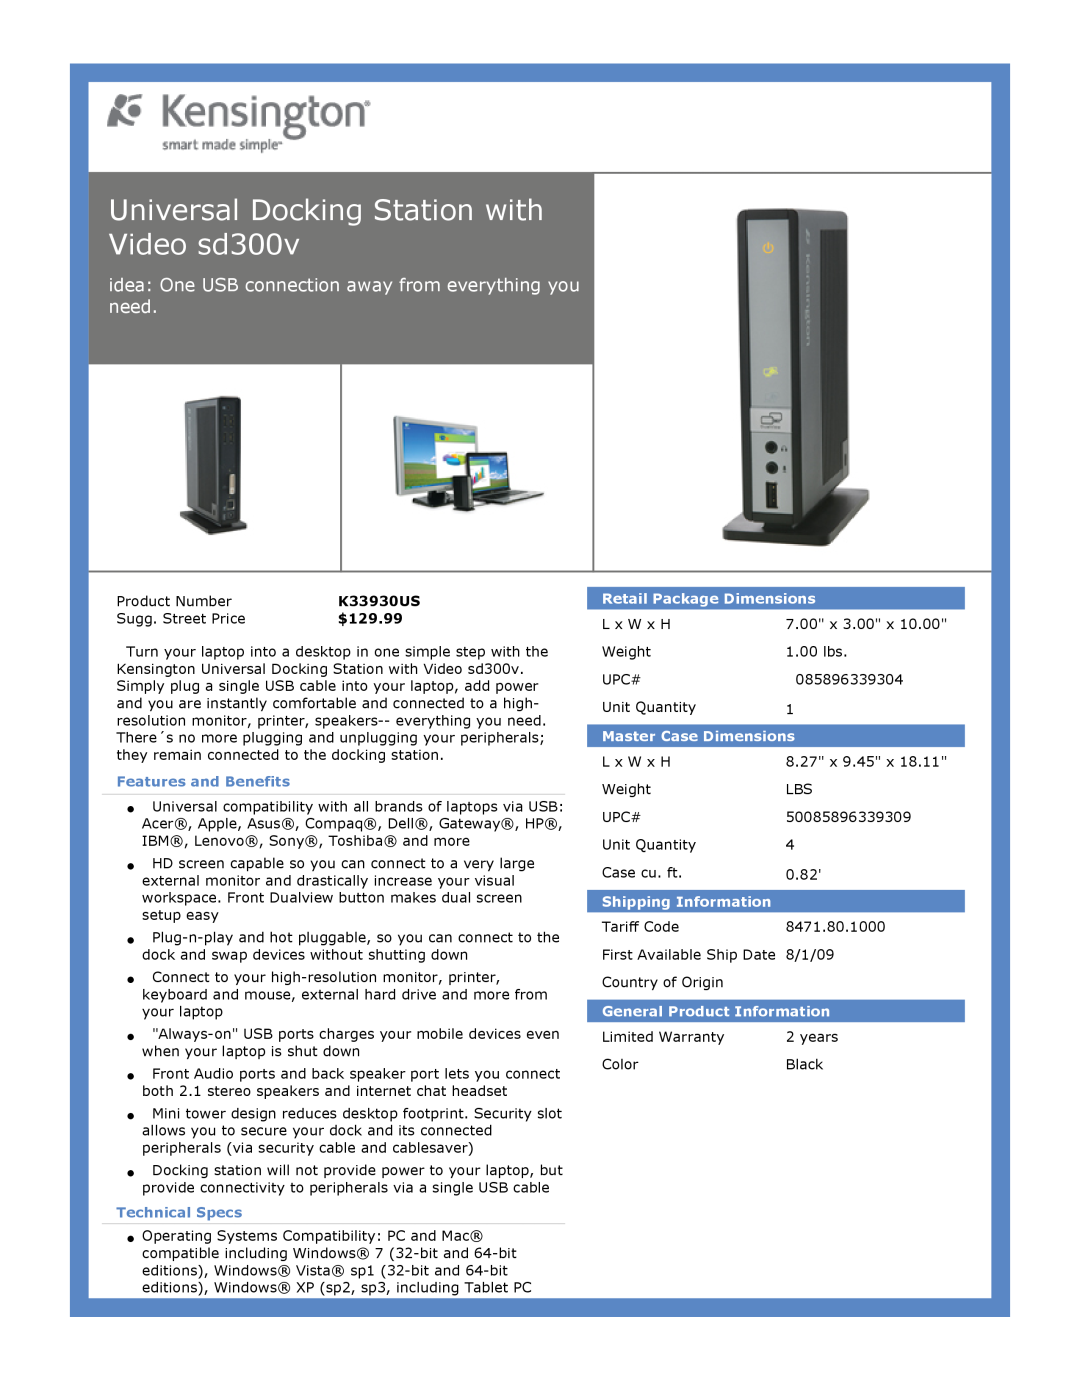 Kensington K33930US dimensions Universal Docking Station with Video sd300v, $129.99, Features and Benefits 